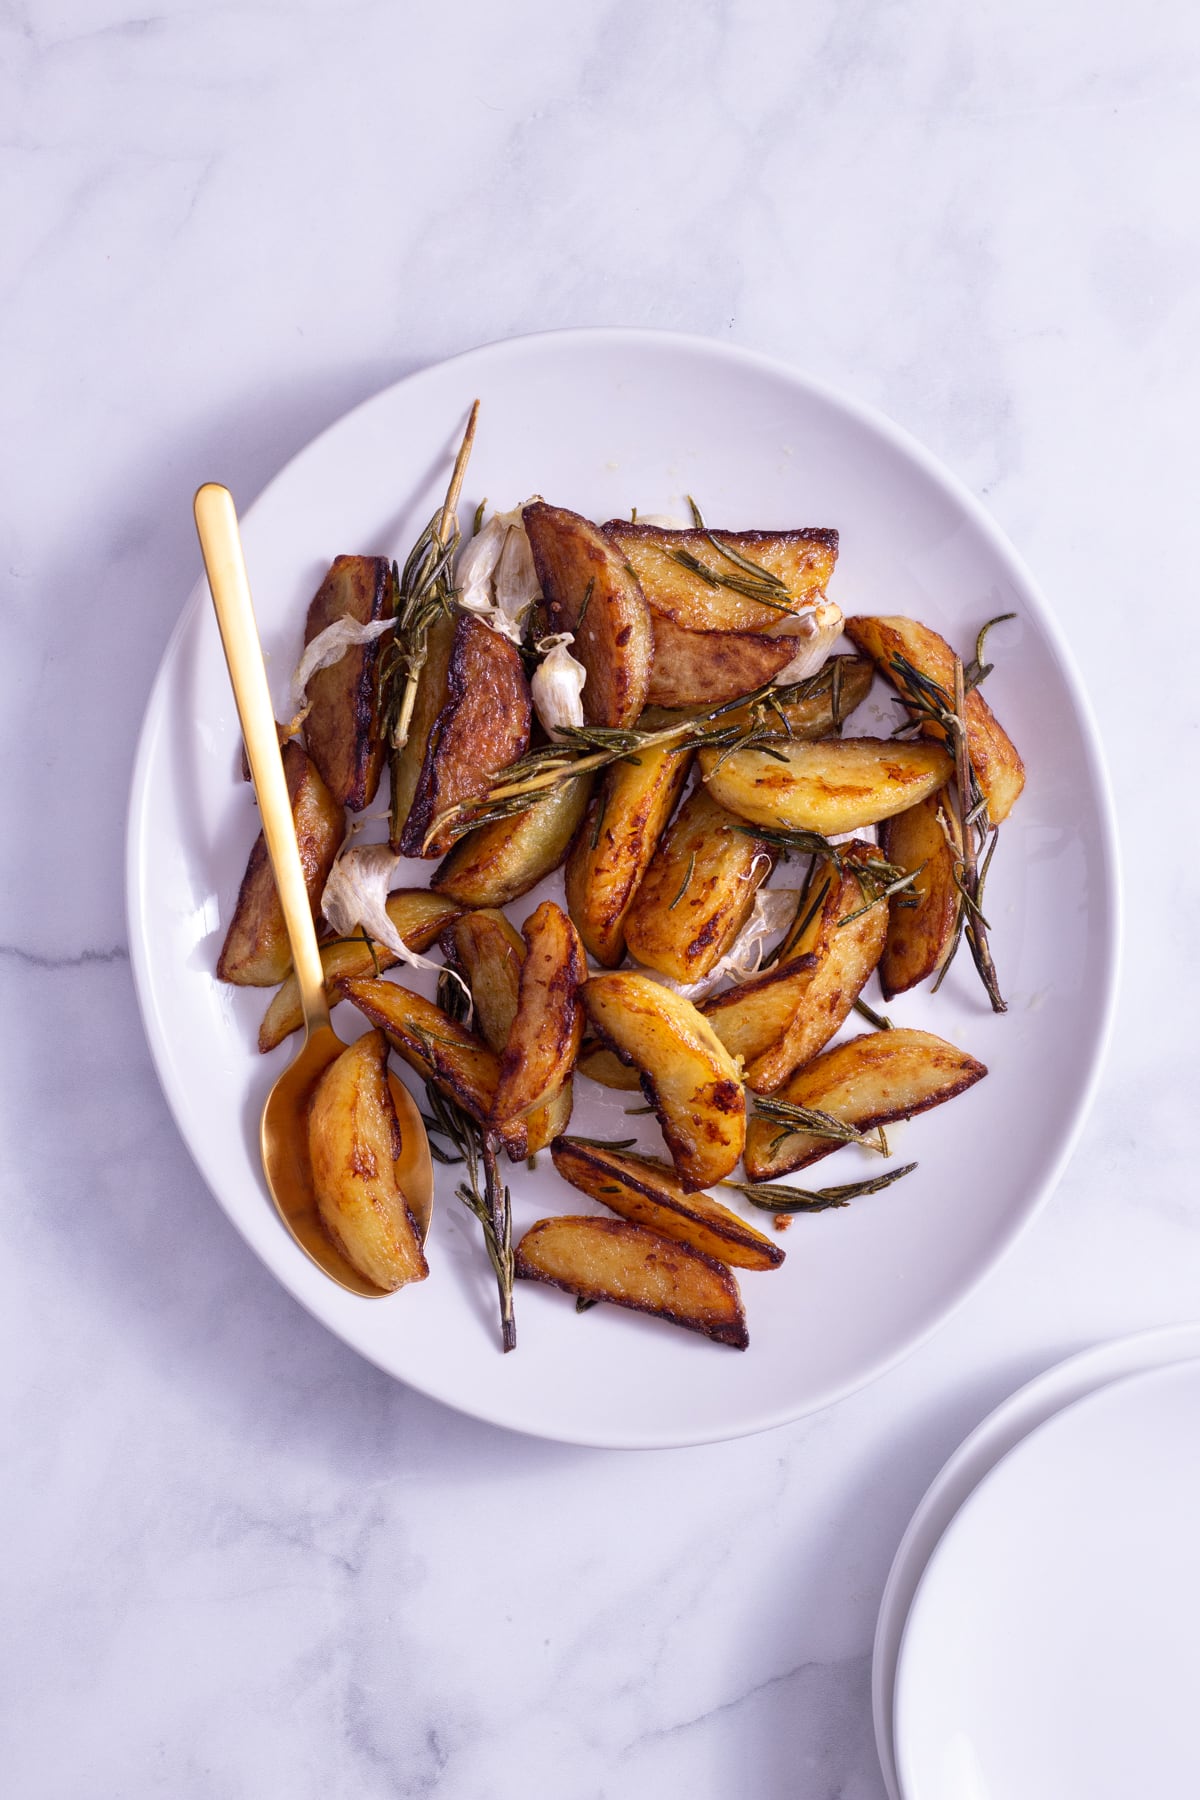 Overhead view of potato wedges with fresh rosemary and garlic cloves on a white platter with a gold spoon on a marble surface.